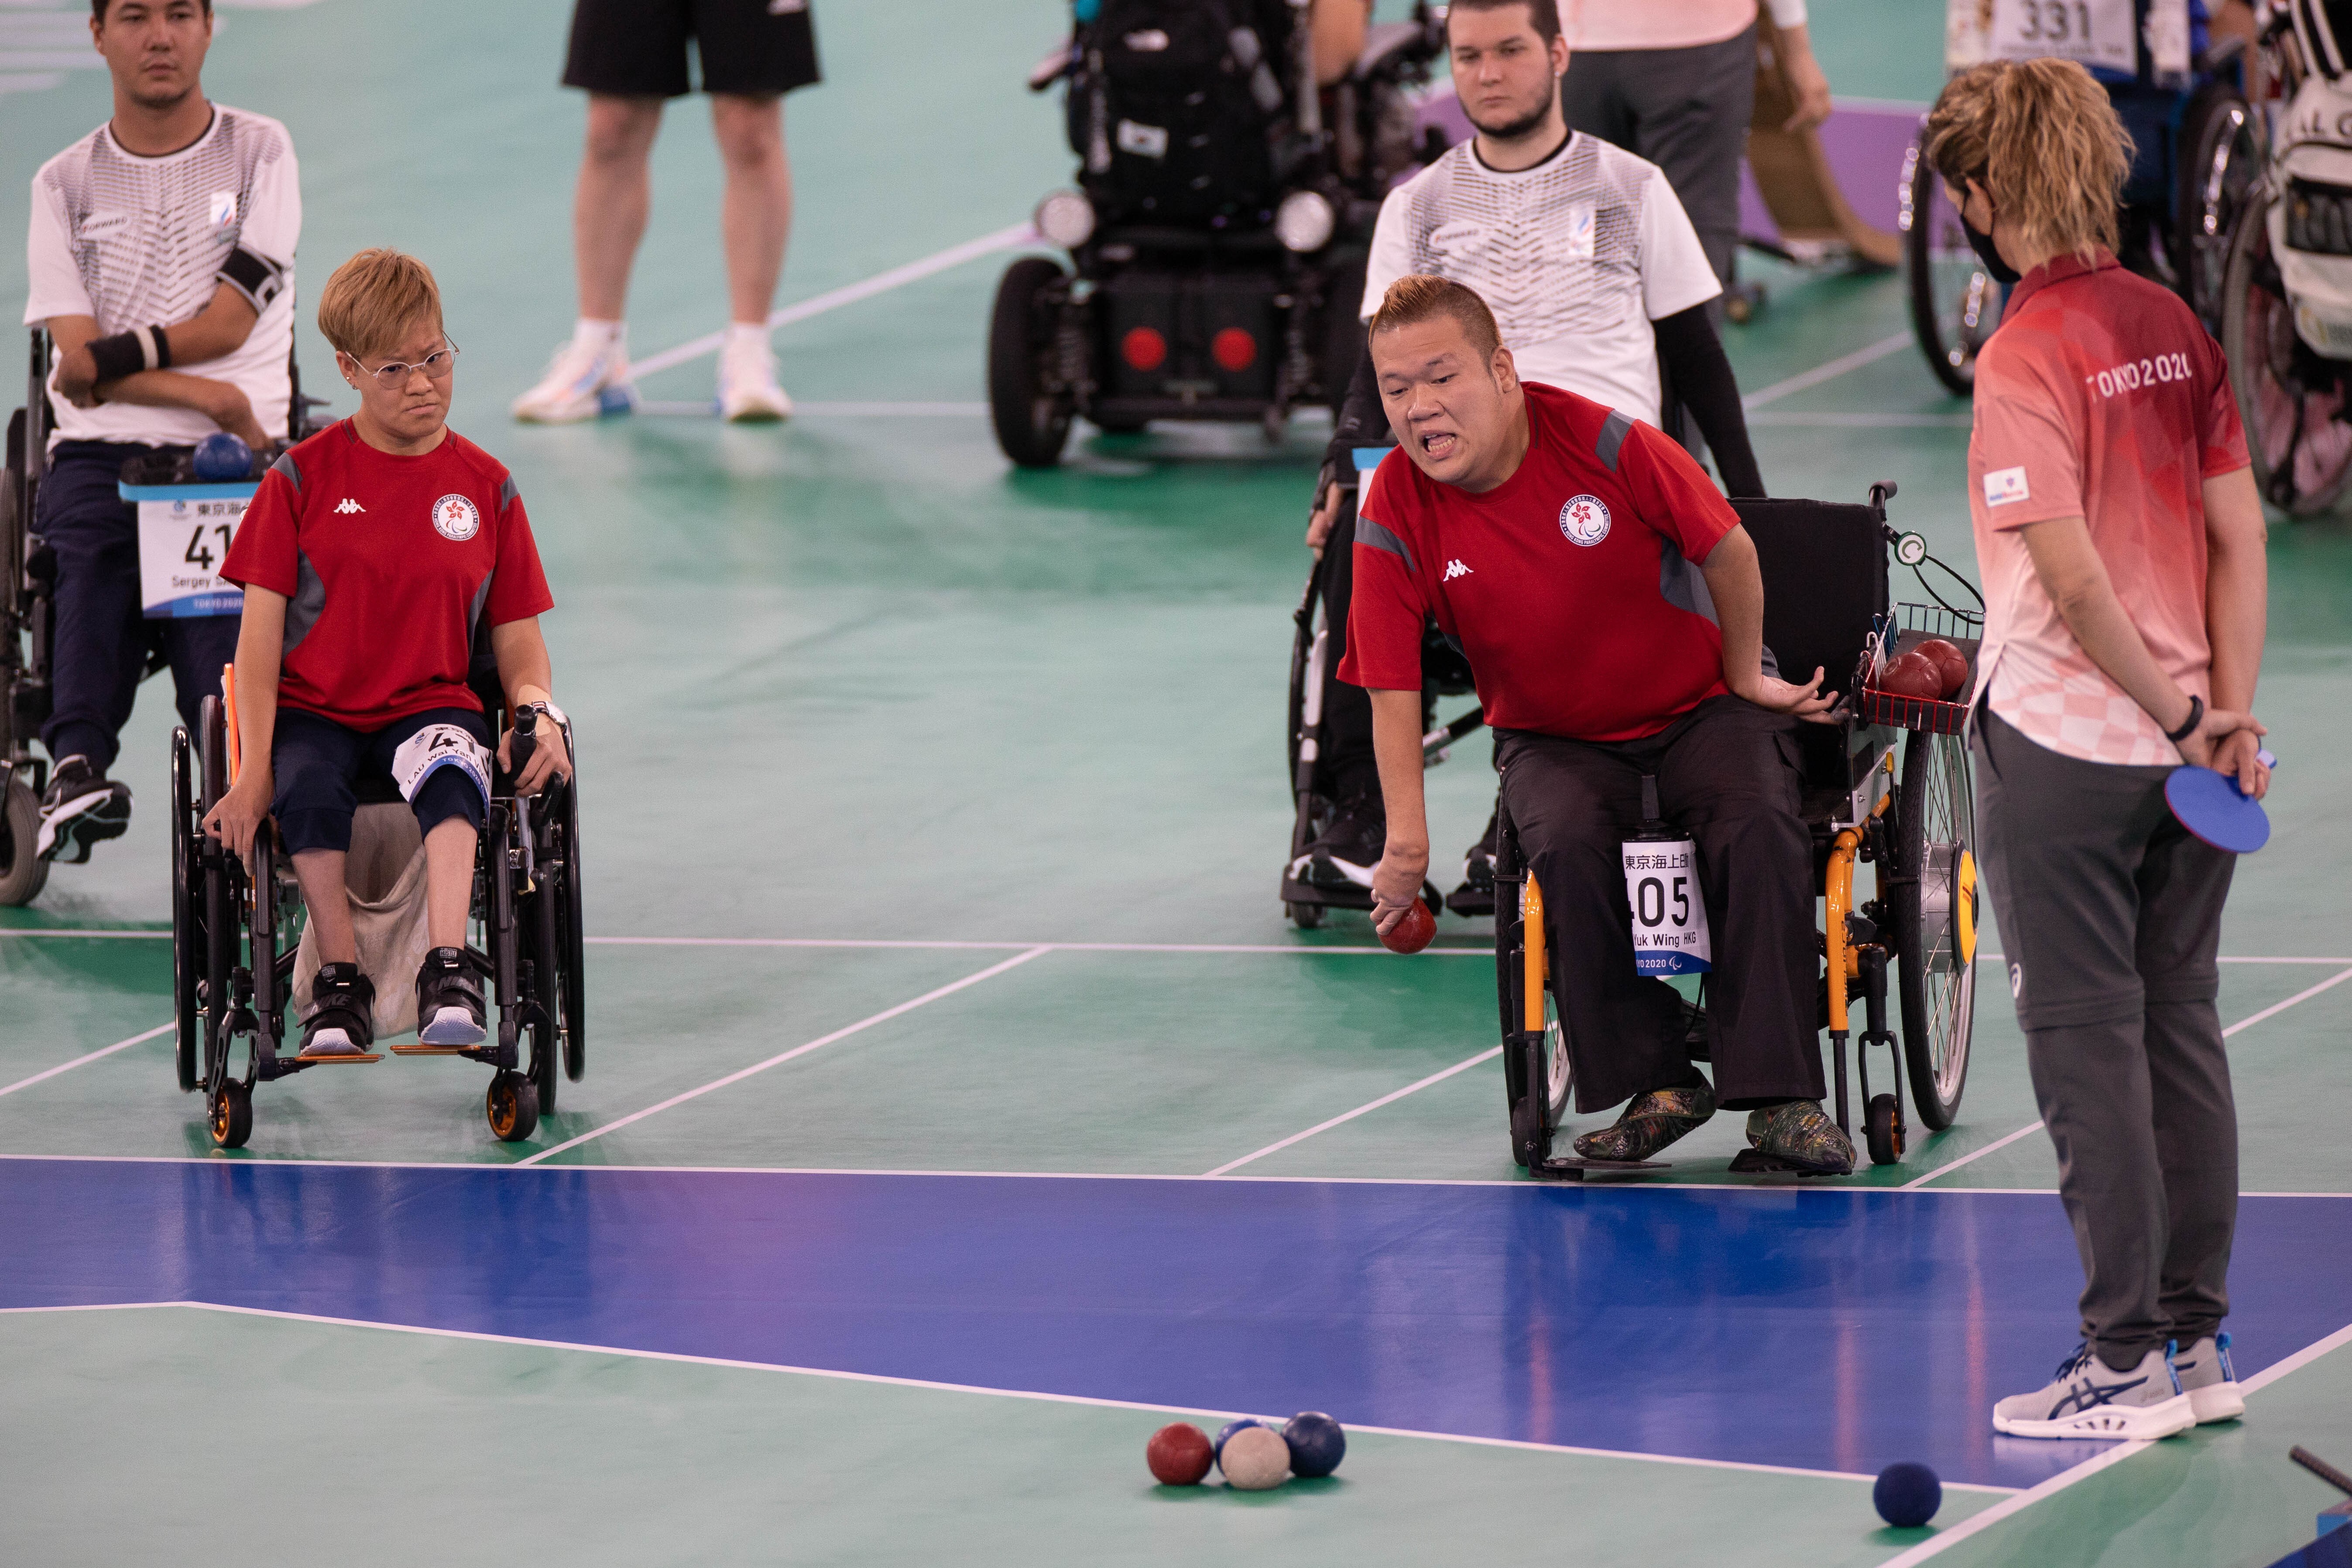 Hong Kong's boccia bowlers in action during the Tokyo 2020 Paralympic Games pairs event. Photo: Hong Kong Paralympic Committee